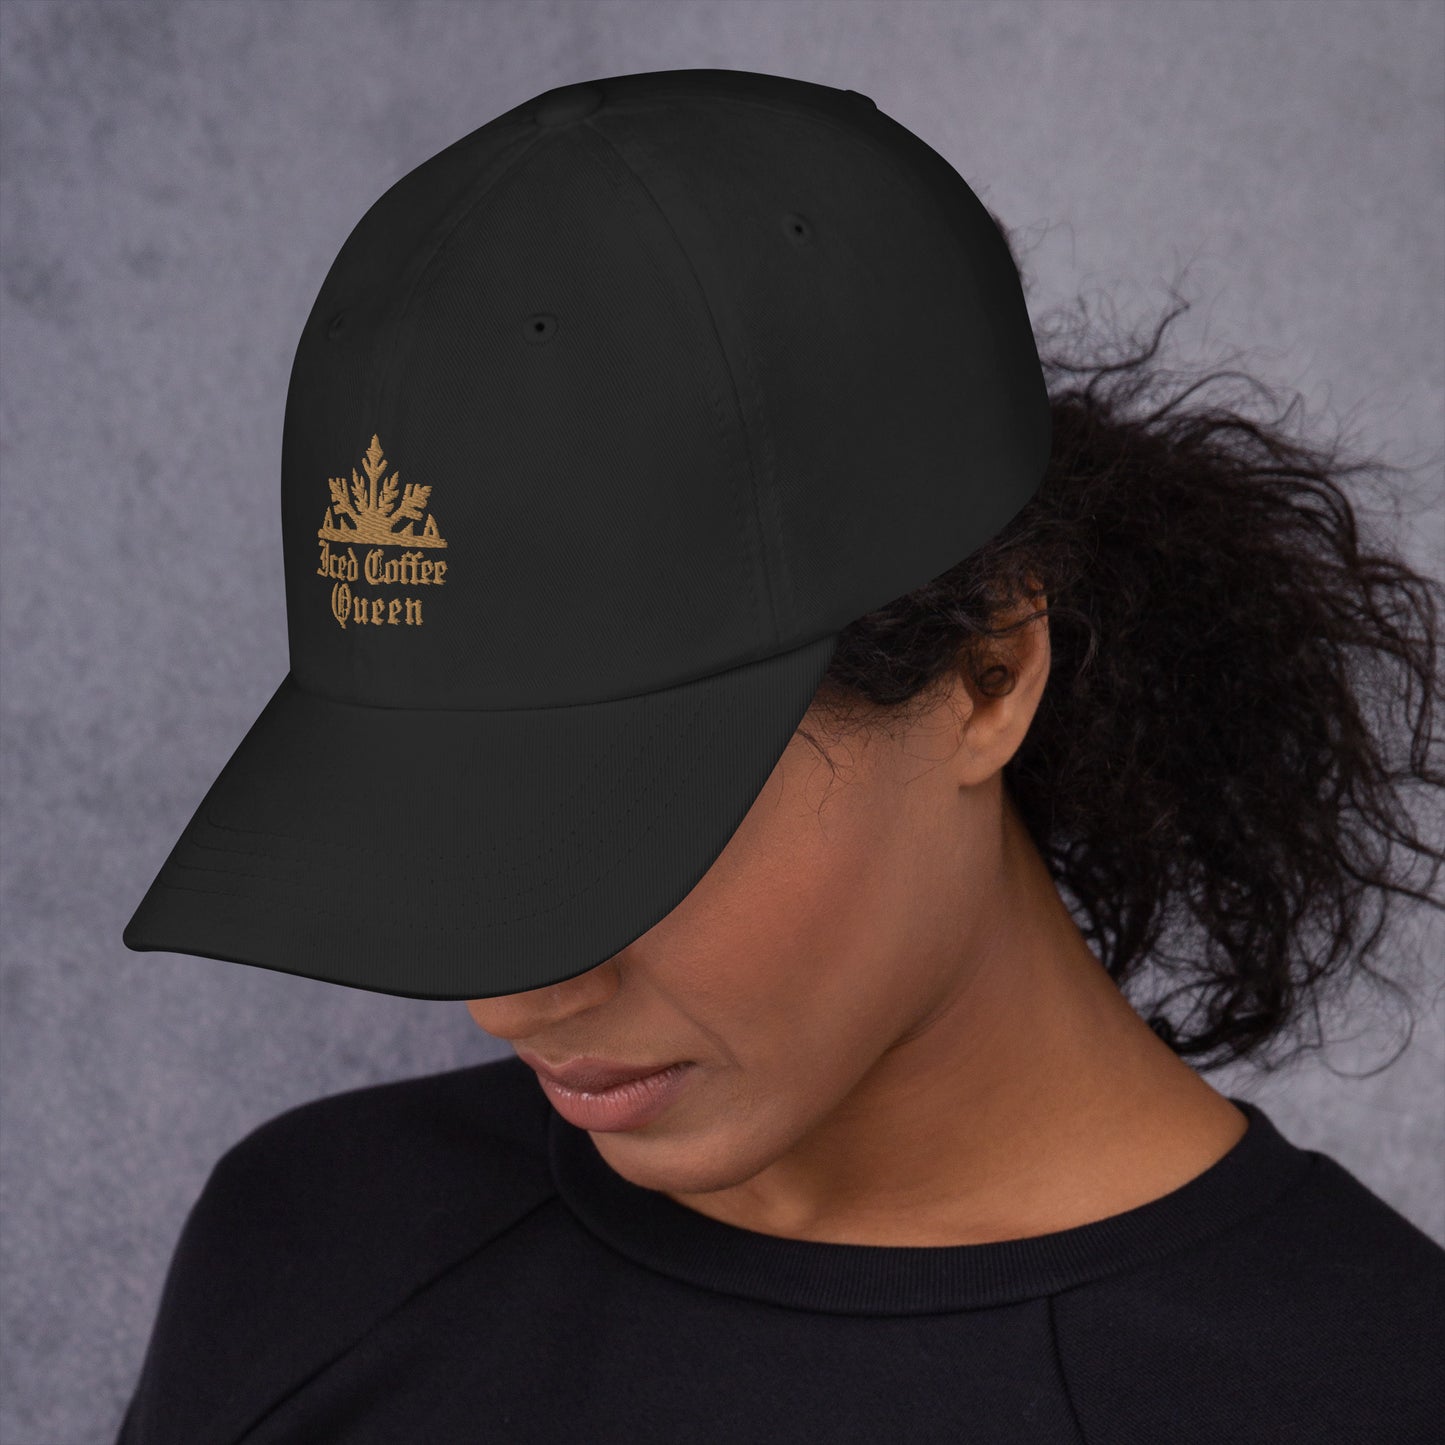 Iced Coffee Queen Dad Hat